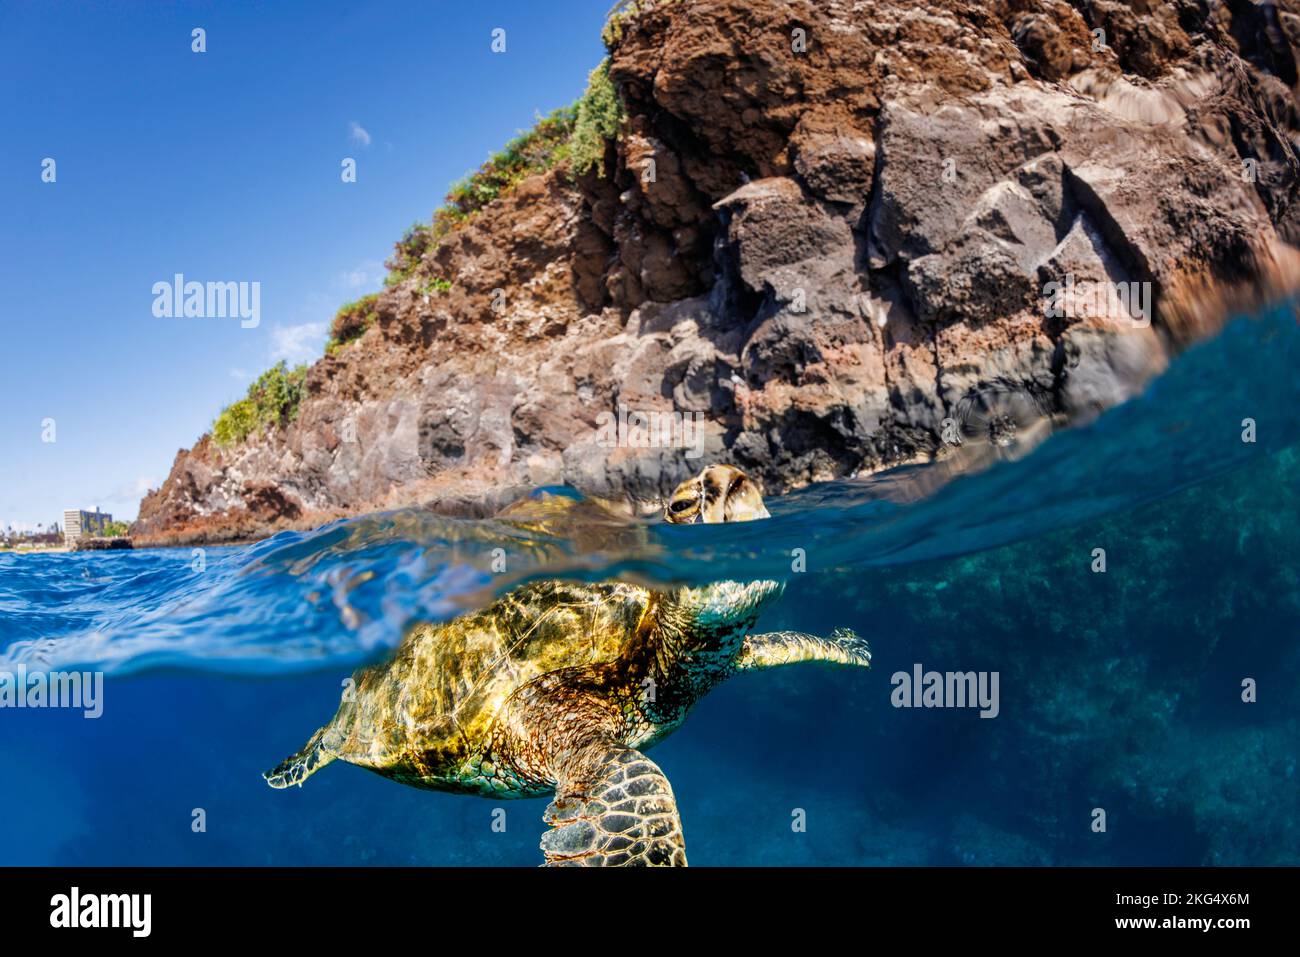 A split image of a green sea turtle, Chelonia mydas, an endangered species, lifting its head for a breath off West Maui, Hawaii. Stock Photo